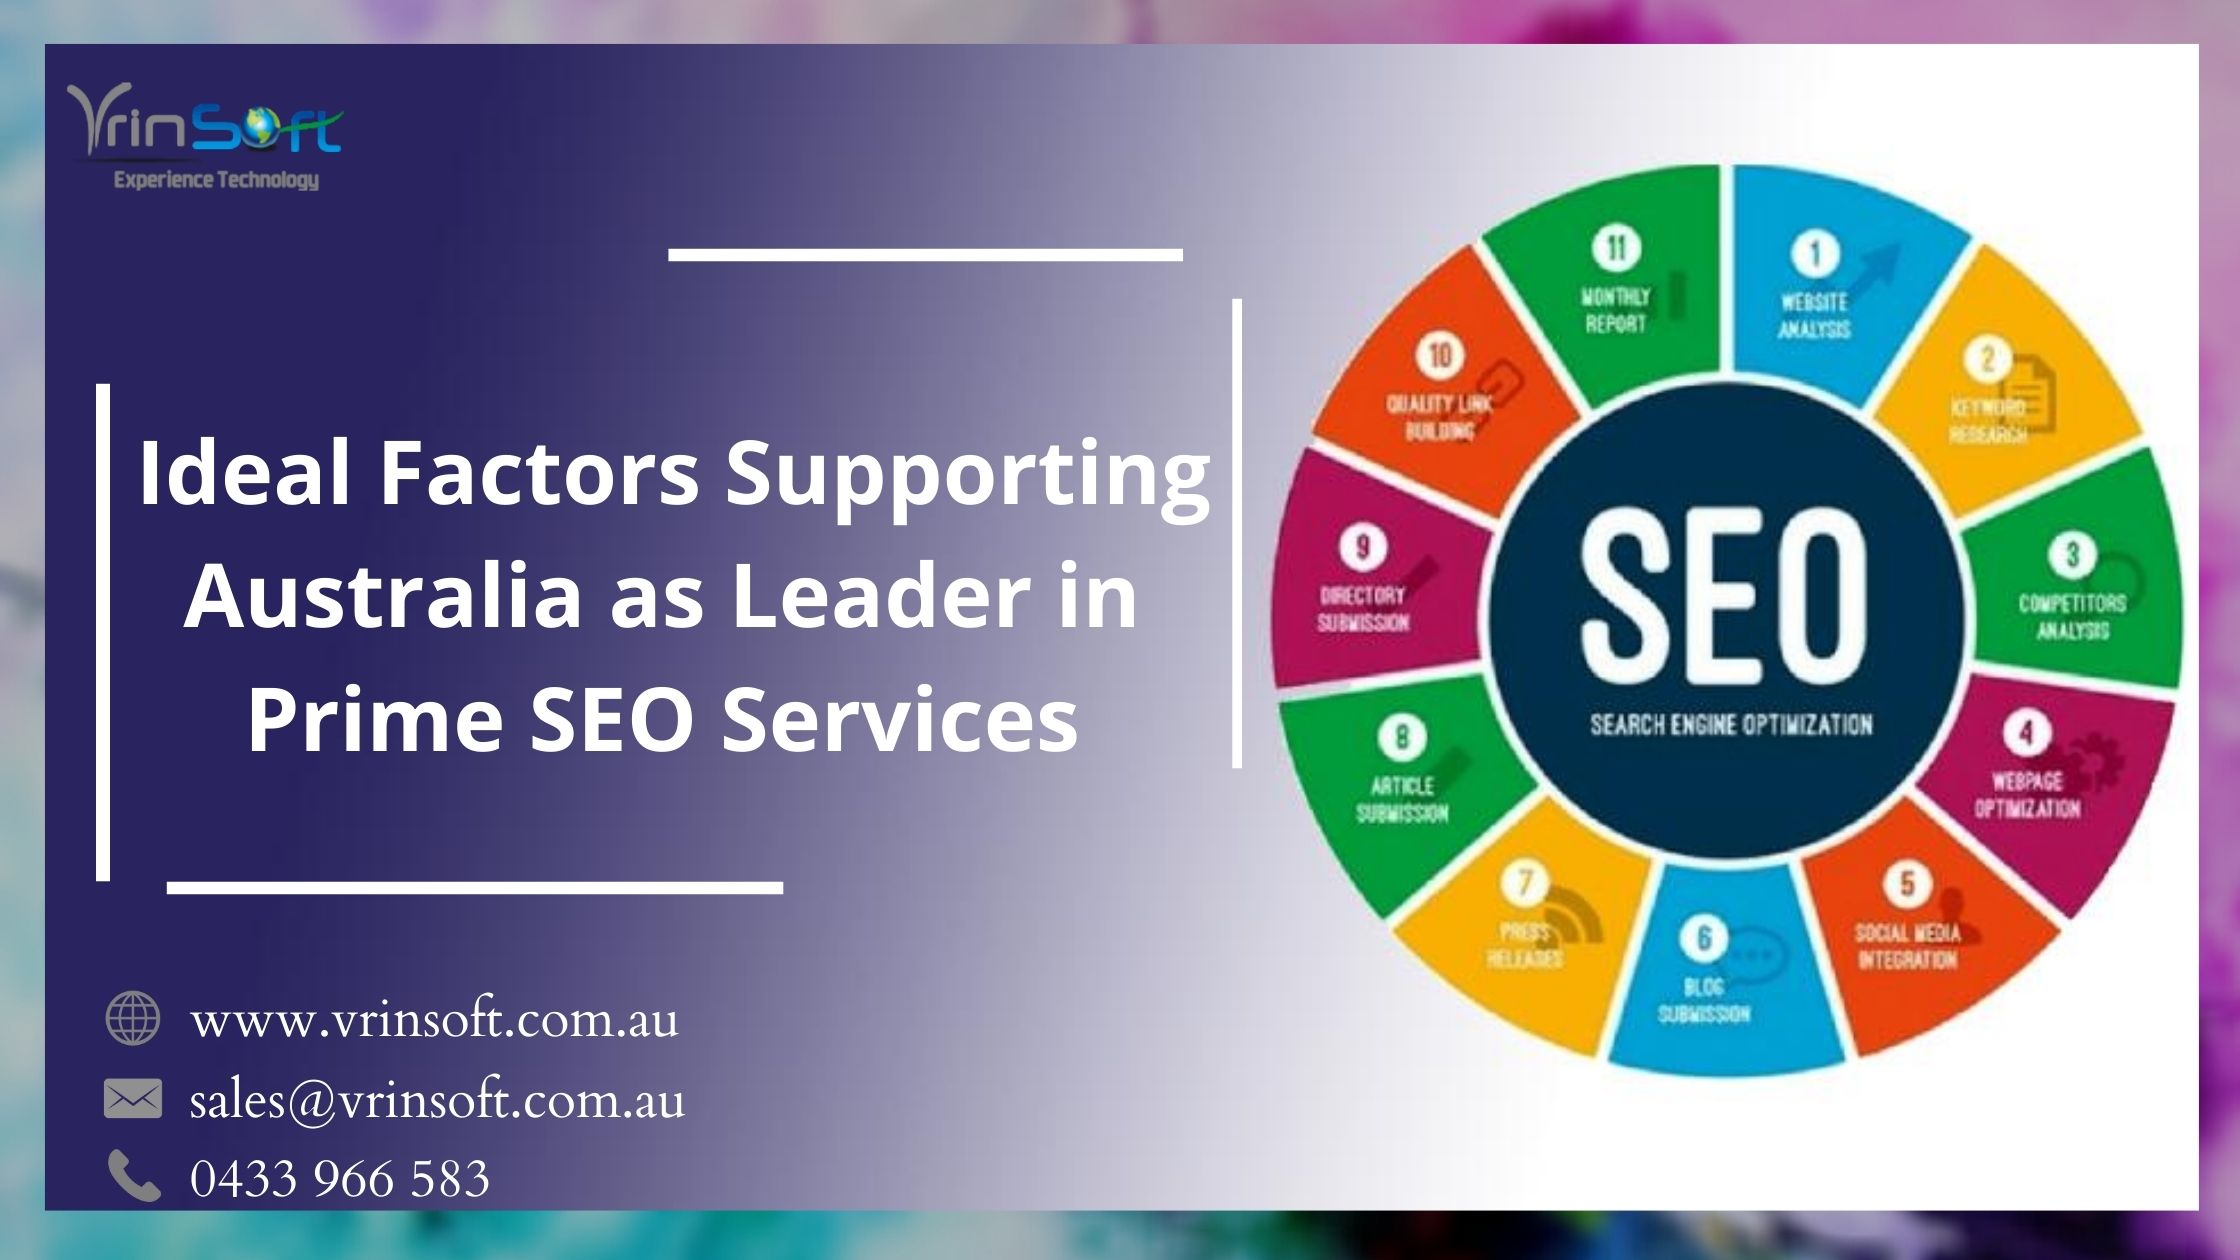 Ideal Factors Supporting Australia as Leader in Prime SEO Services